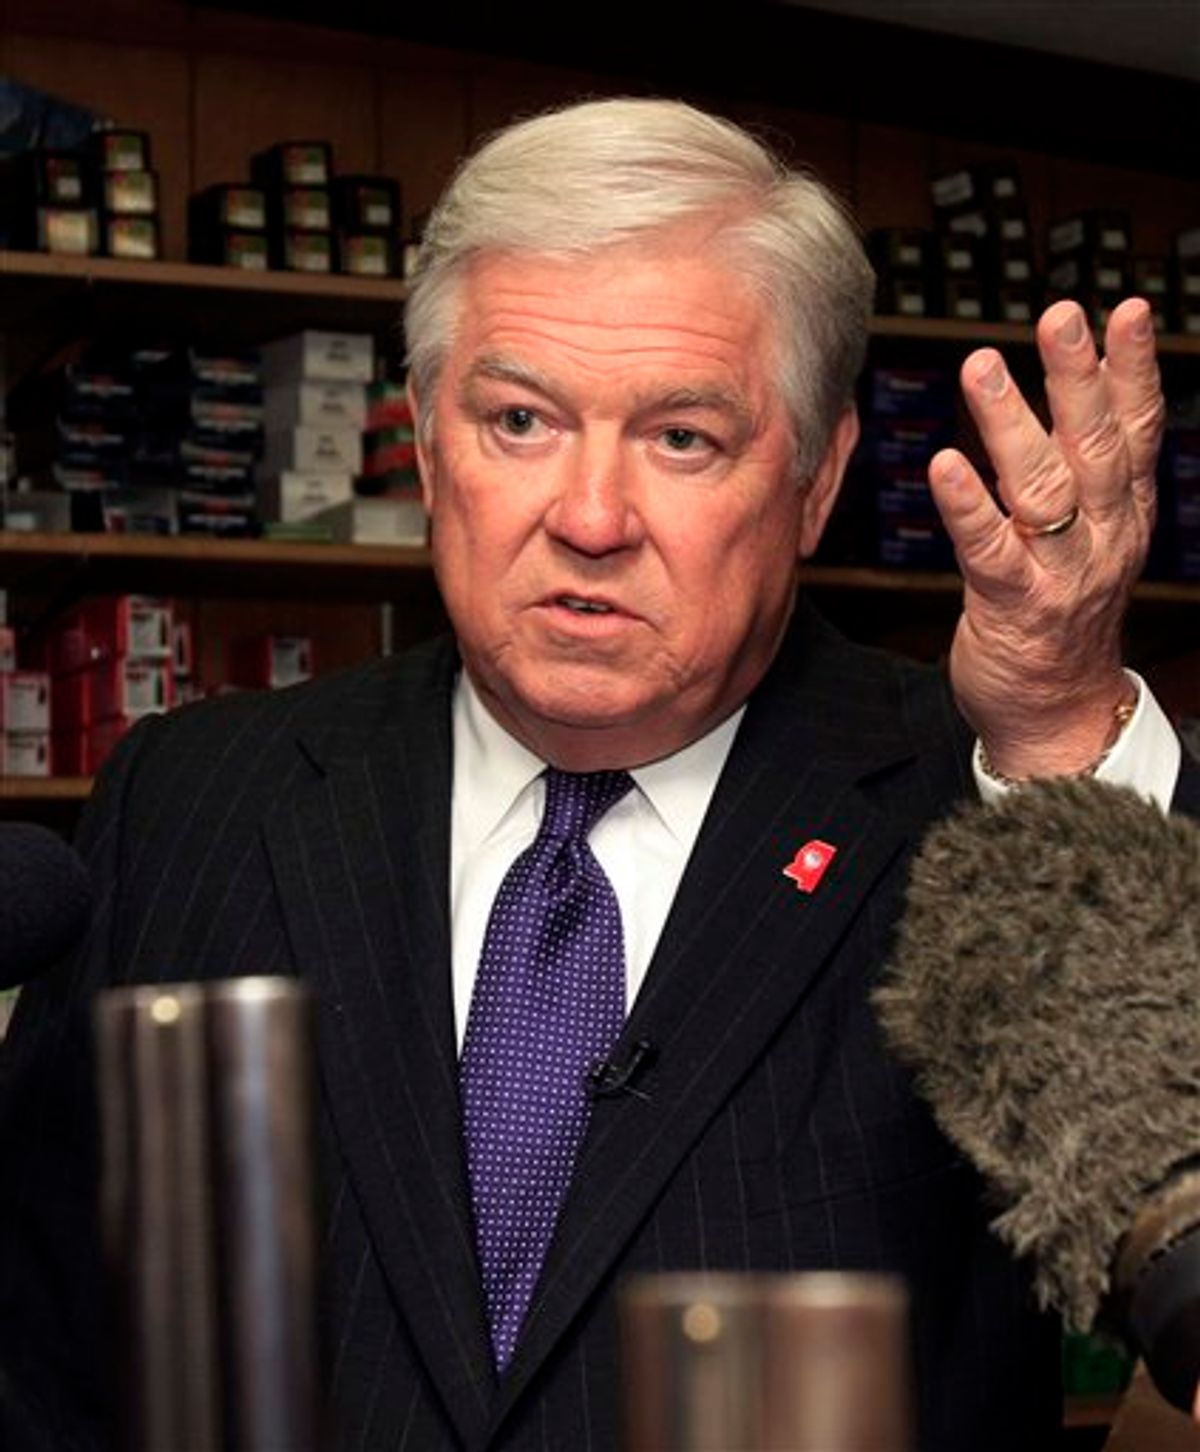 Possible Republican presidential candidate, Mississippi Gov. Haley Barbour talks with reporters at Riley's Gun Shop, Thursday, April 14, 2011, in Hookset, N.H. (AP Photo/Jim Cole) (AP)